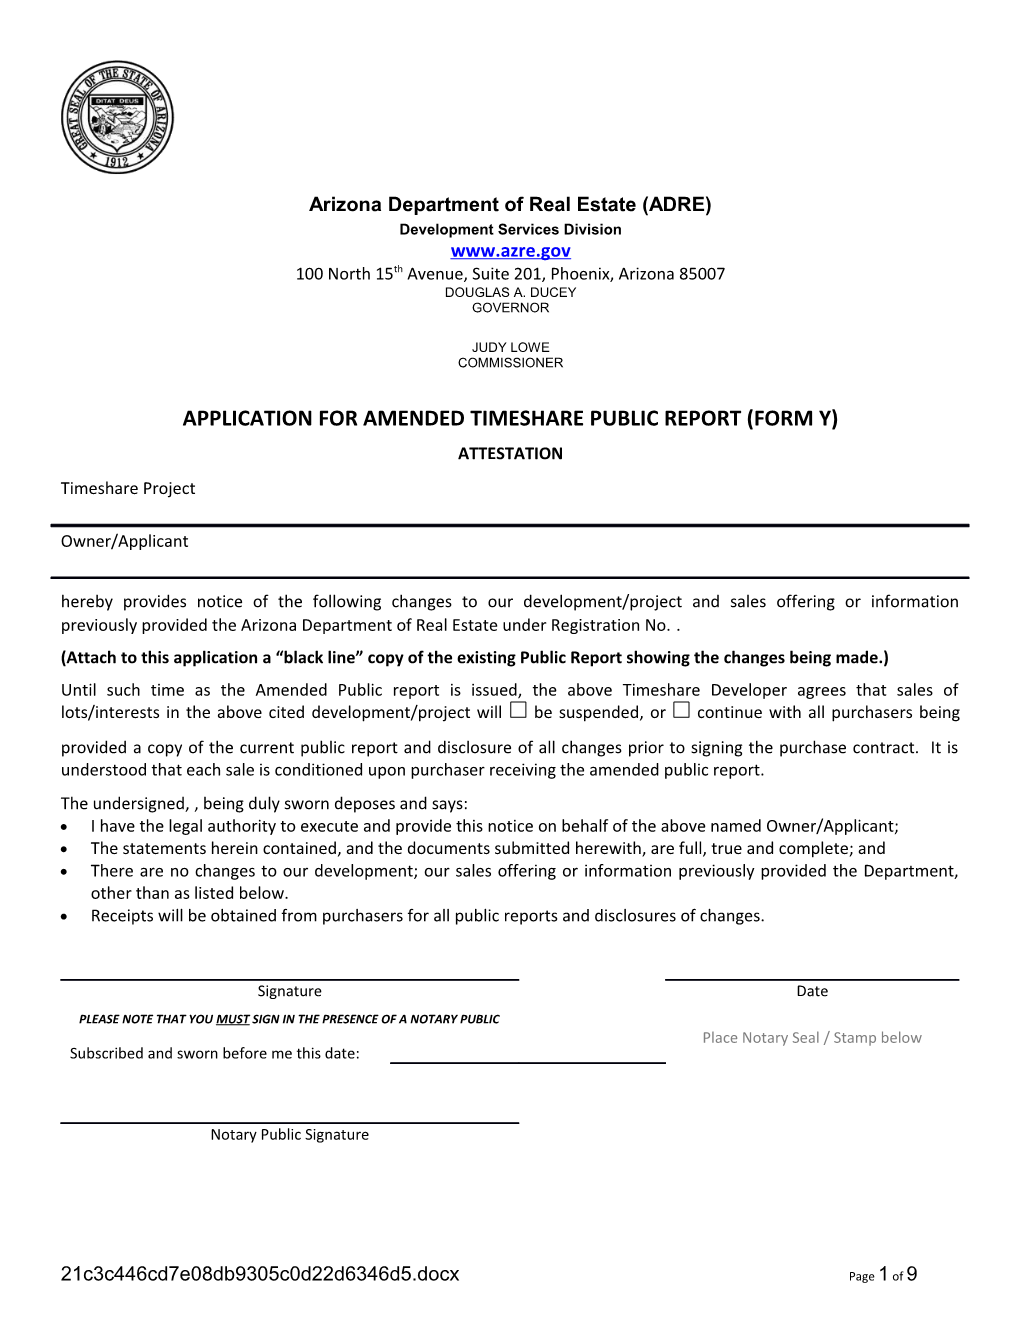 Application for Amended Timeshare Public Report (Form Y)